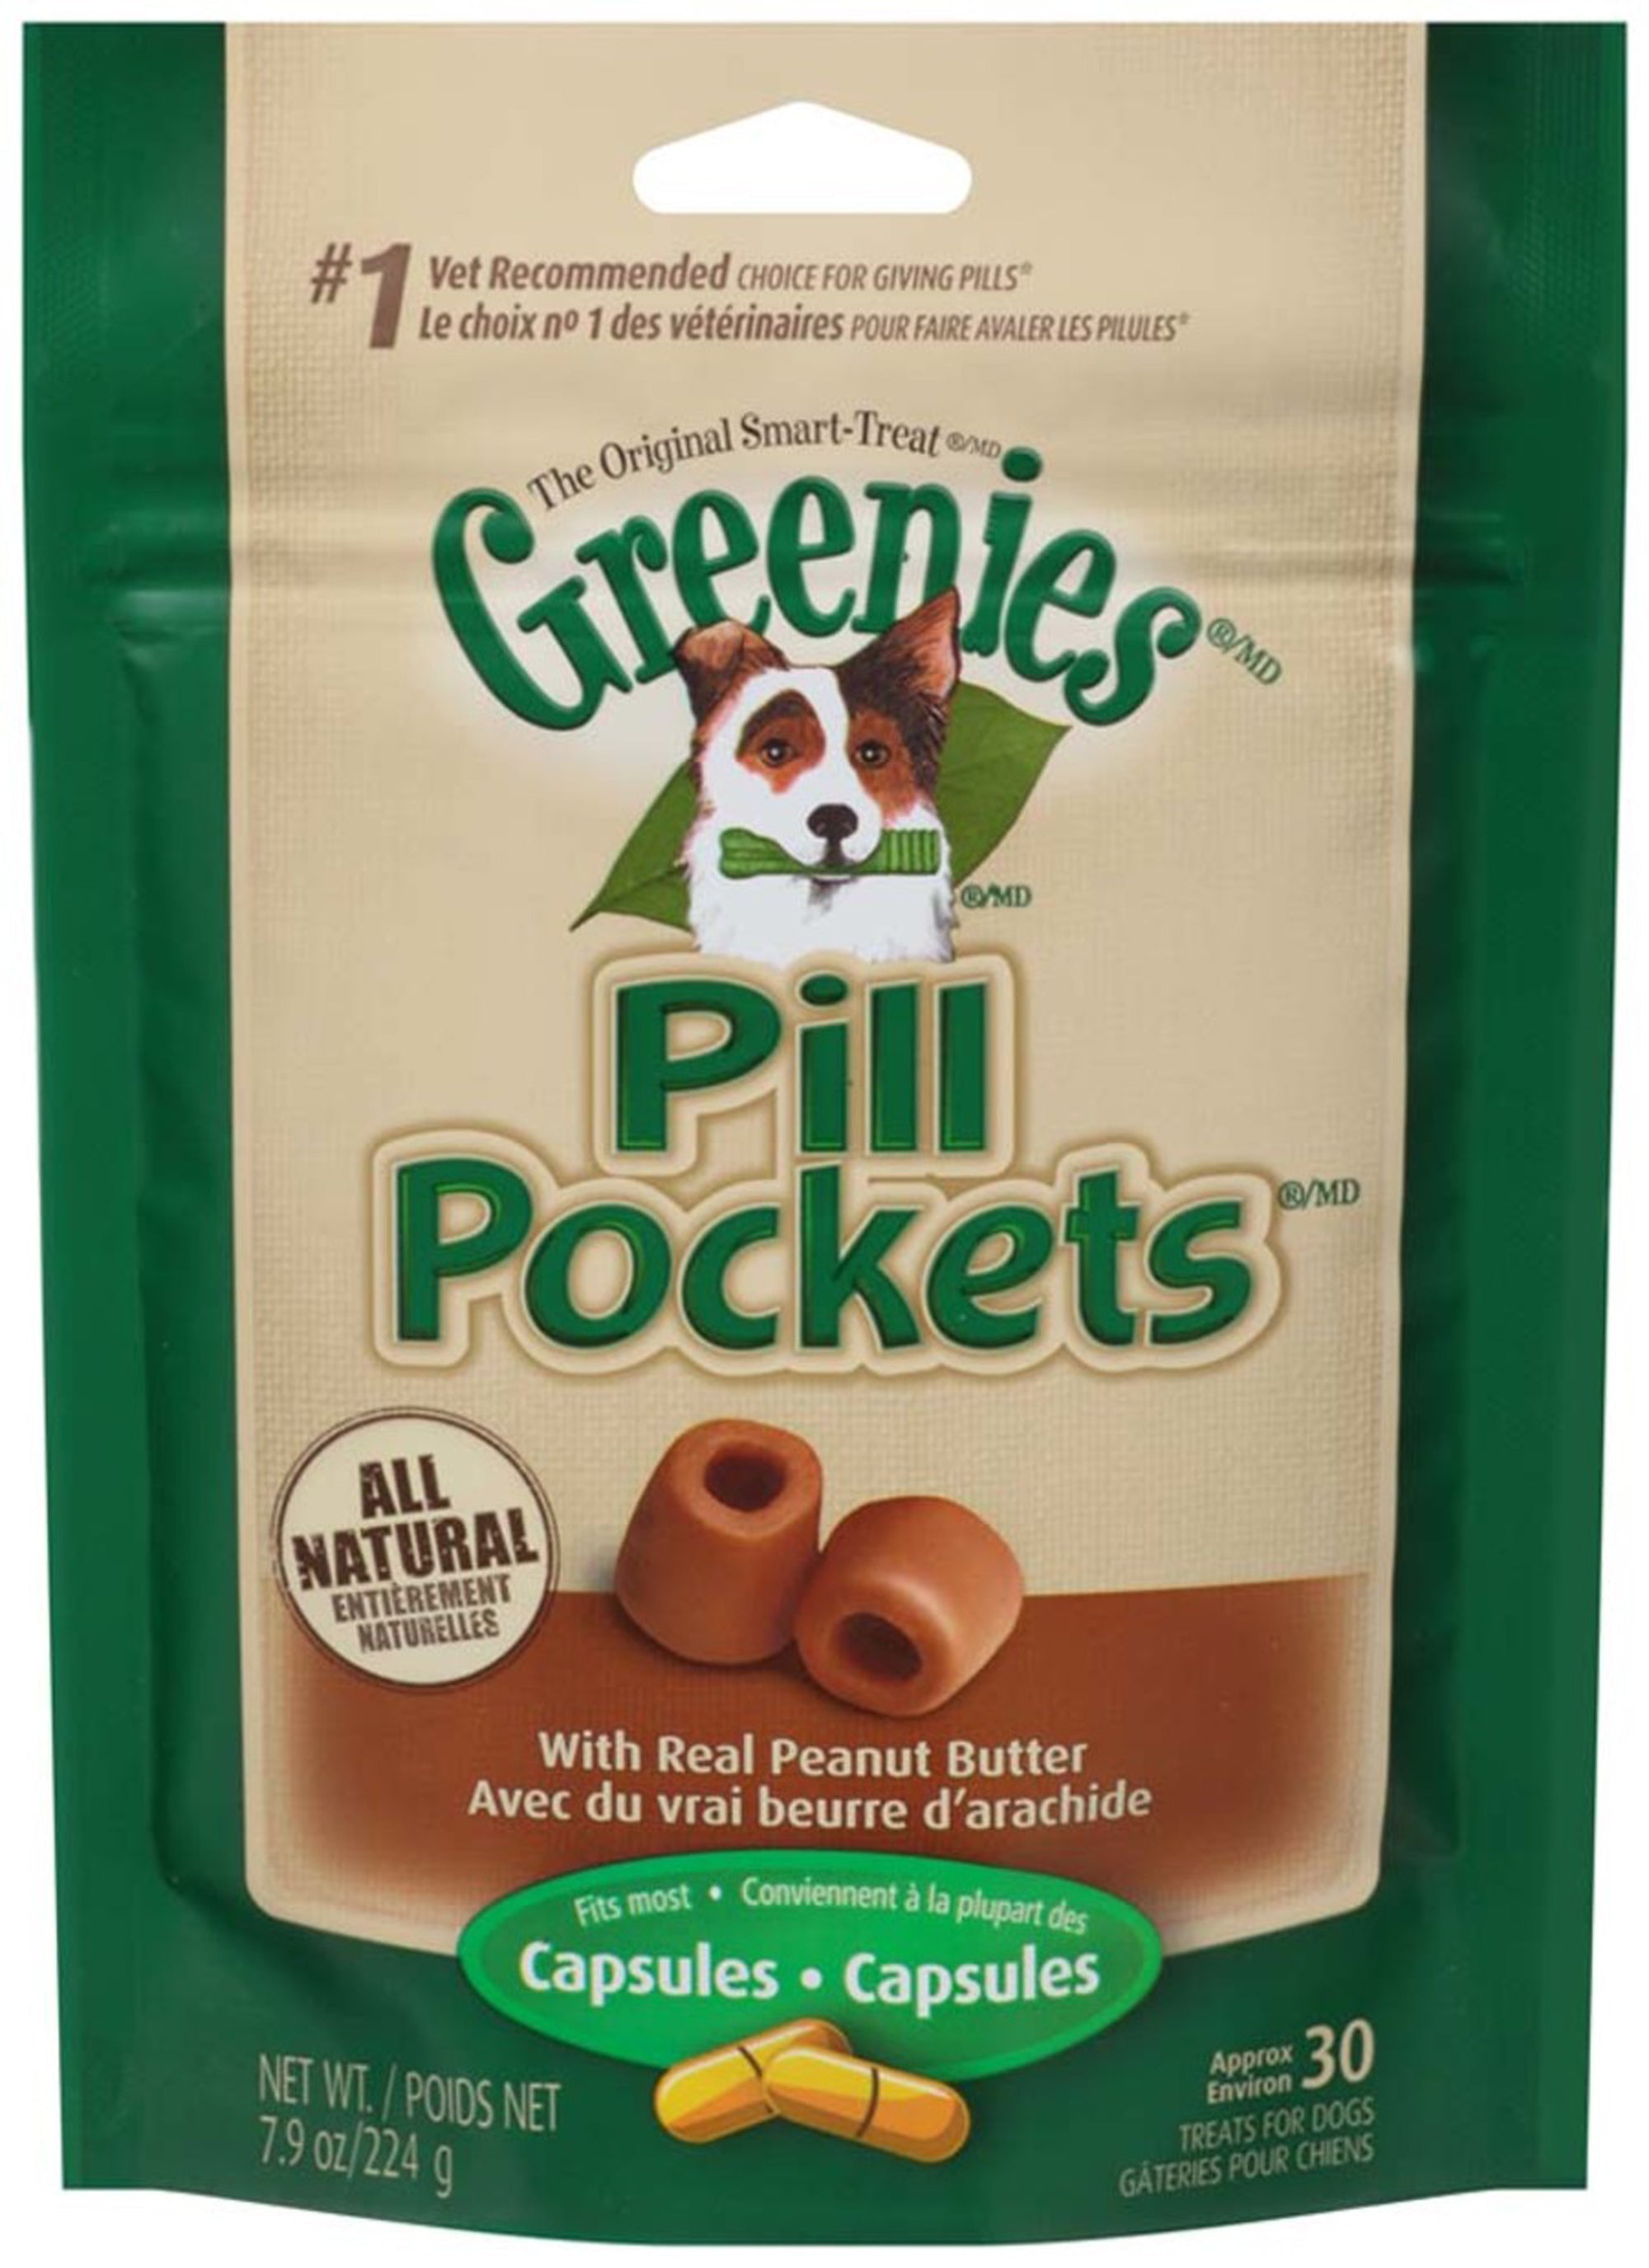 Greenies Pill Pockets for Capsules Peanut Butter 1ea/30 ct, 7.9 oz